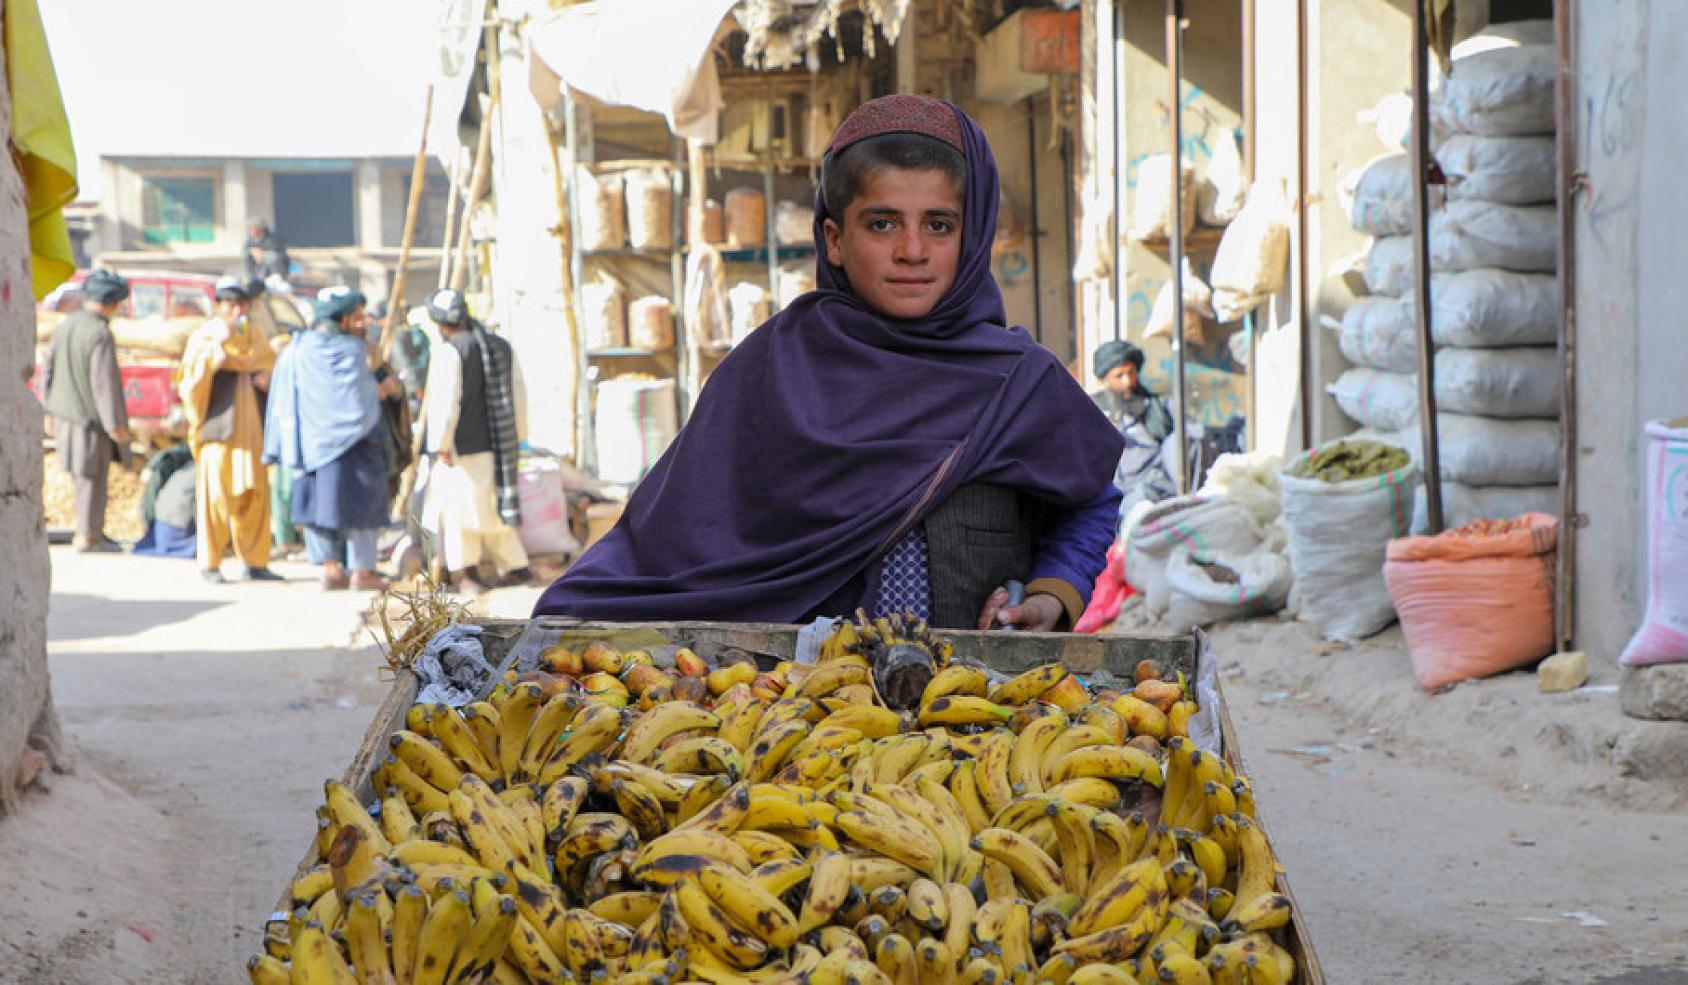 A 12-year-old boy, who does not go to school, sells bananas in Uruzgan Province in western Afghanistan.